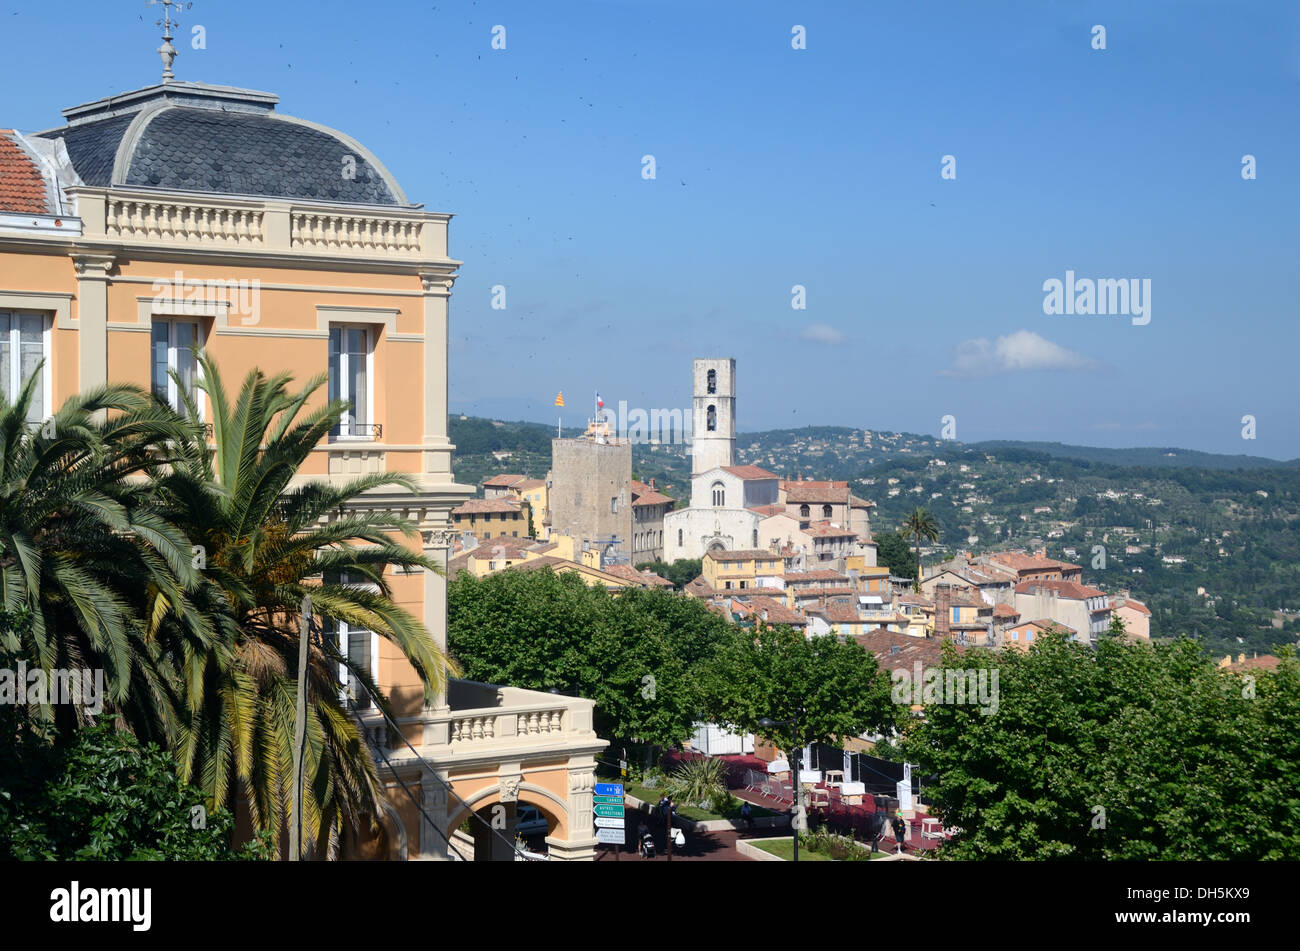 Casino & View over the Old Town or Historic District Grasse Alpes-Maritimes France Stock Photo